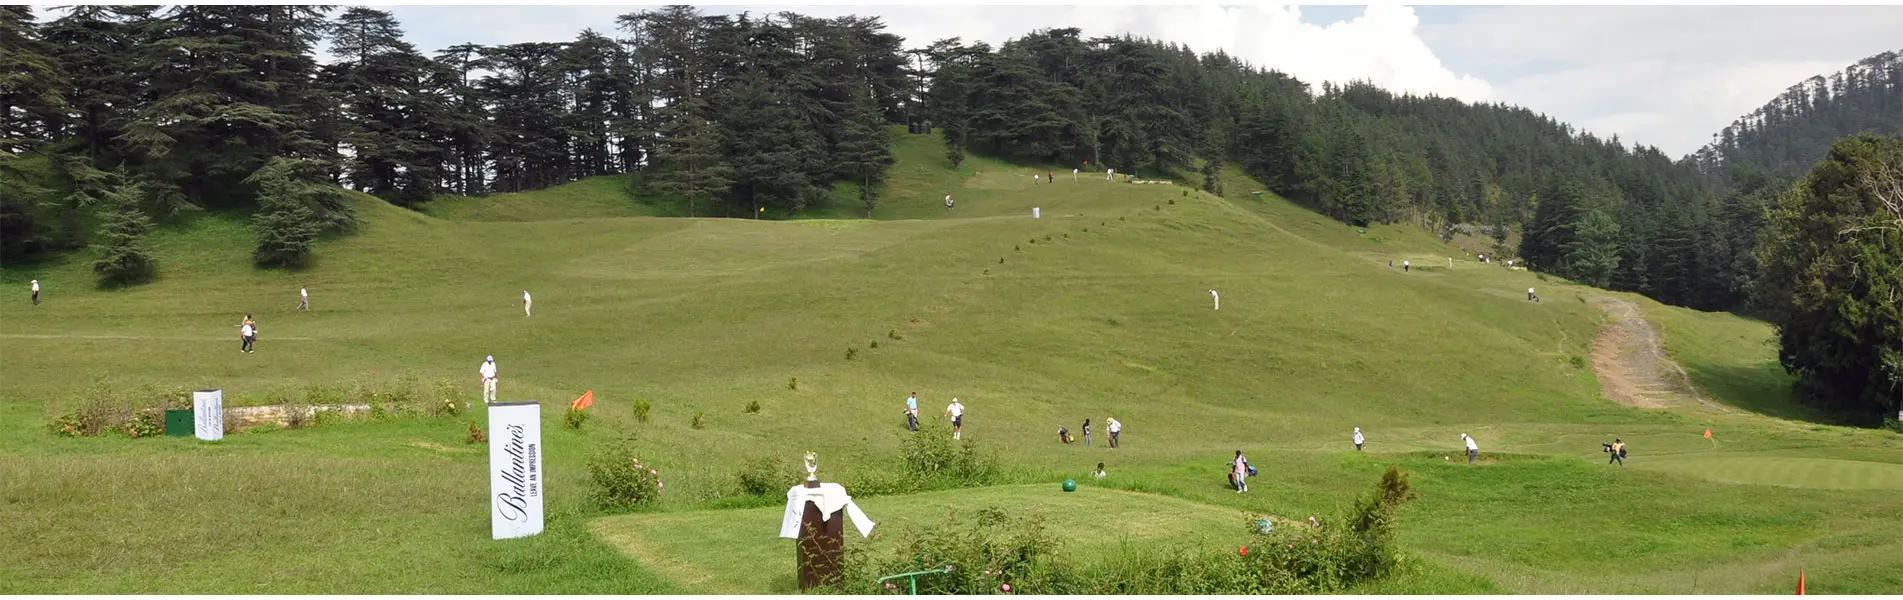 The Naldehra Golf Course and the terms of using the Chalets website